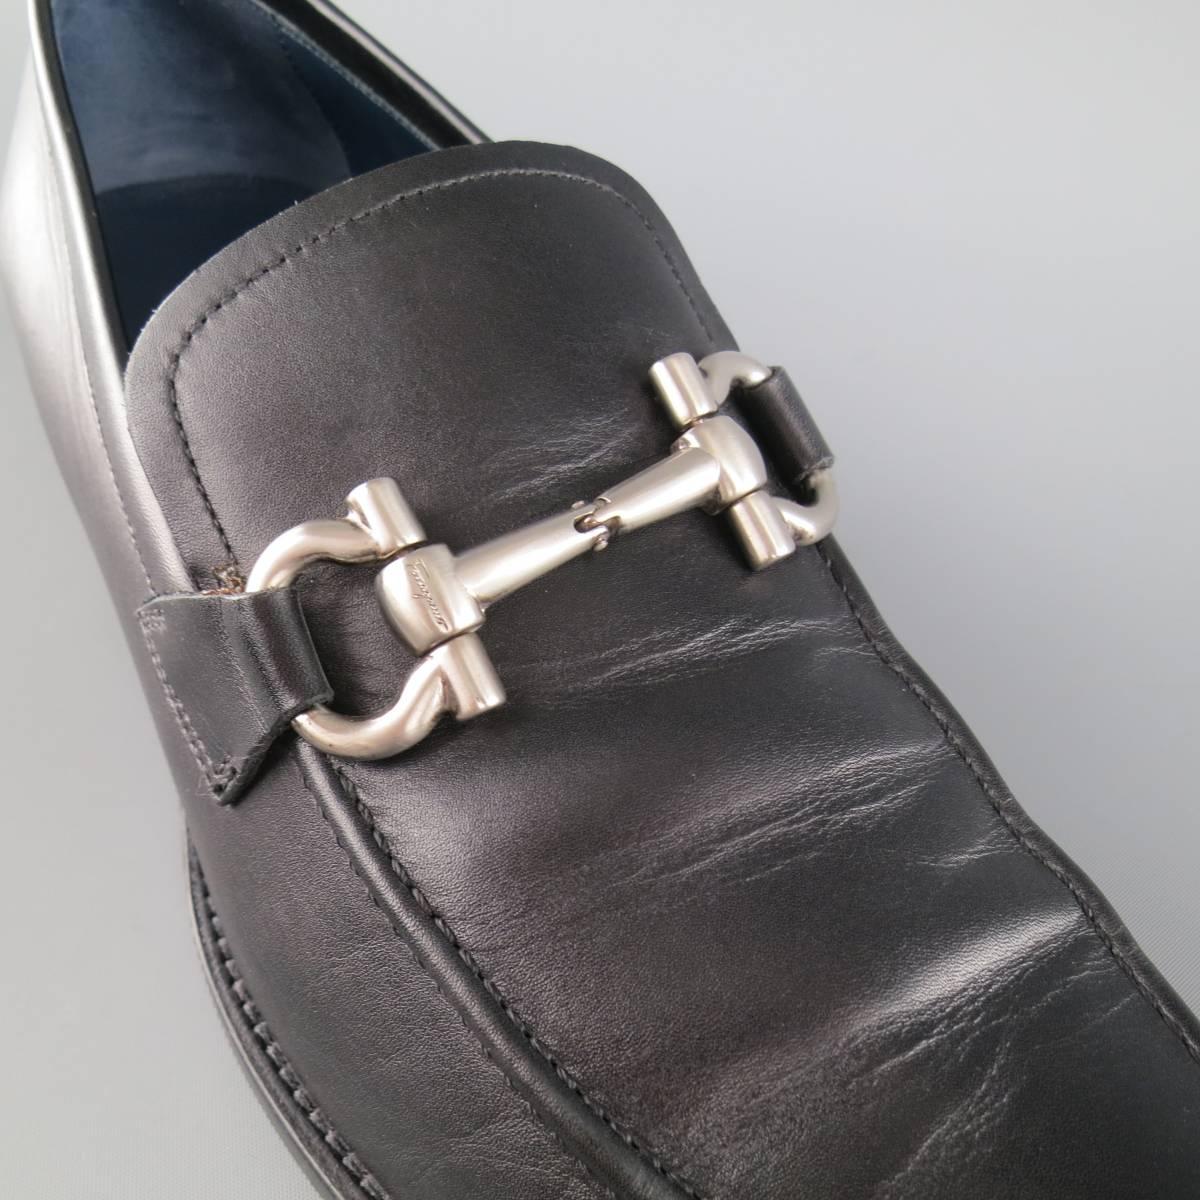 SALVATORE FERRAGAMO Loafers consists of leather material in a black color tone. Designed with signature double-gancio buckle in silver tone and top tone-on-tone stitching. Leather sole with rubber heel. Made in Italy.
 
Good Pre-Owned